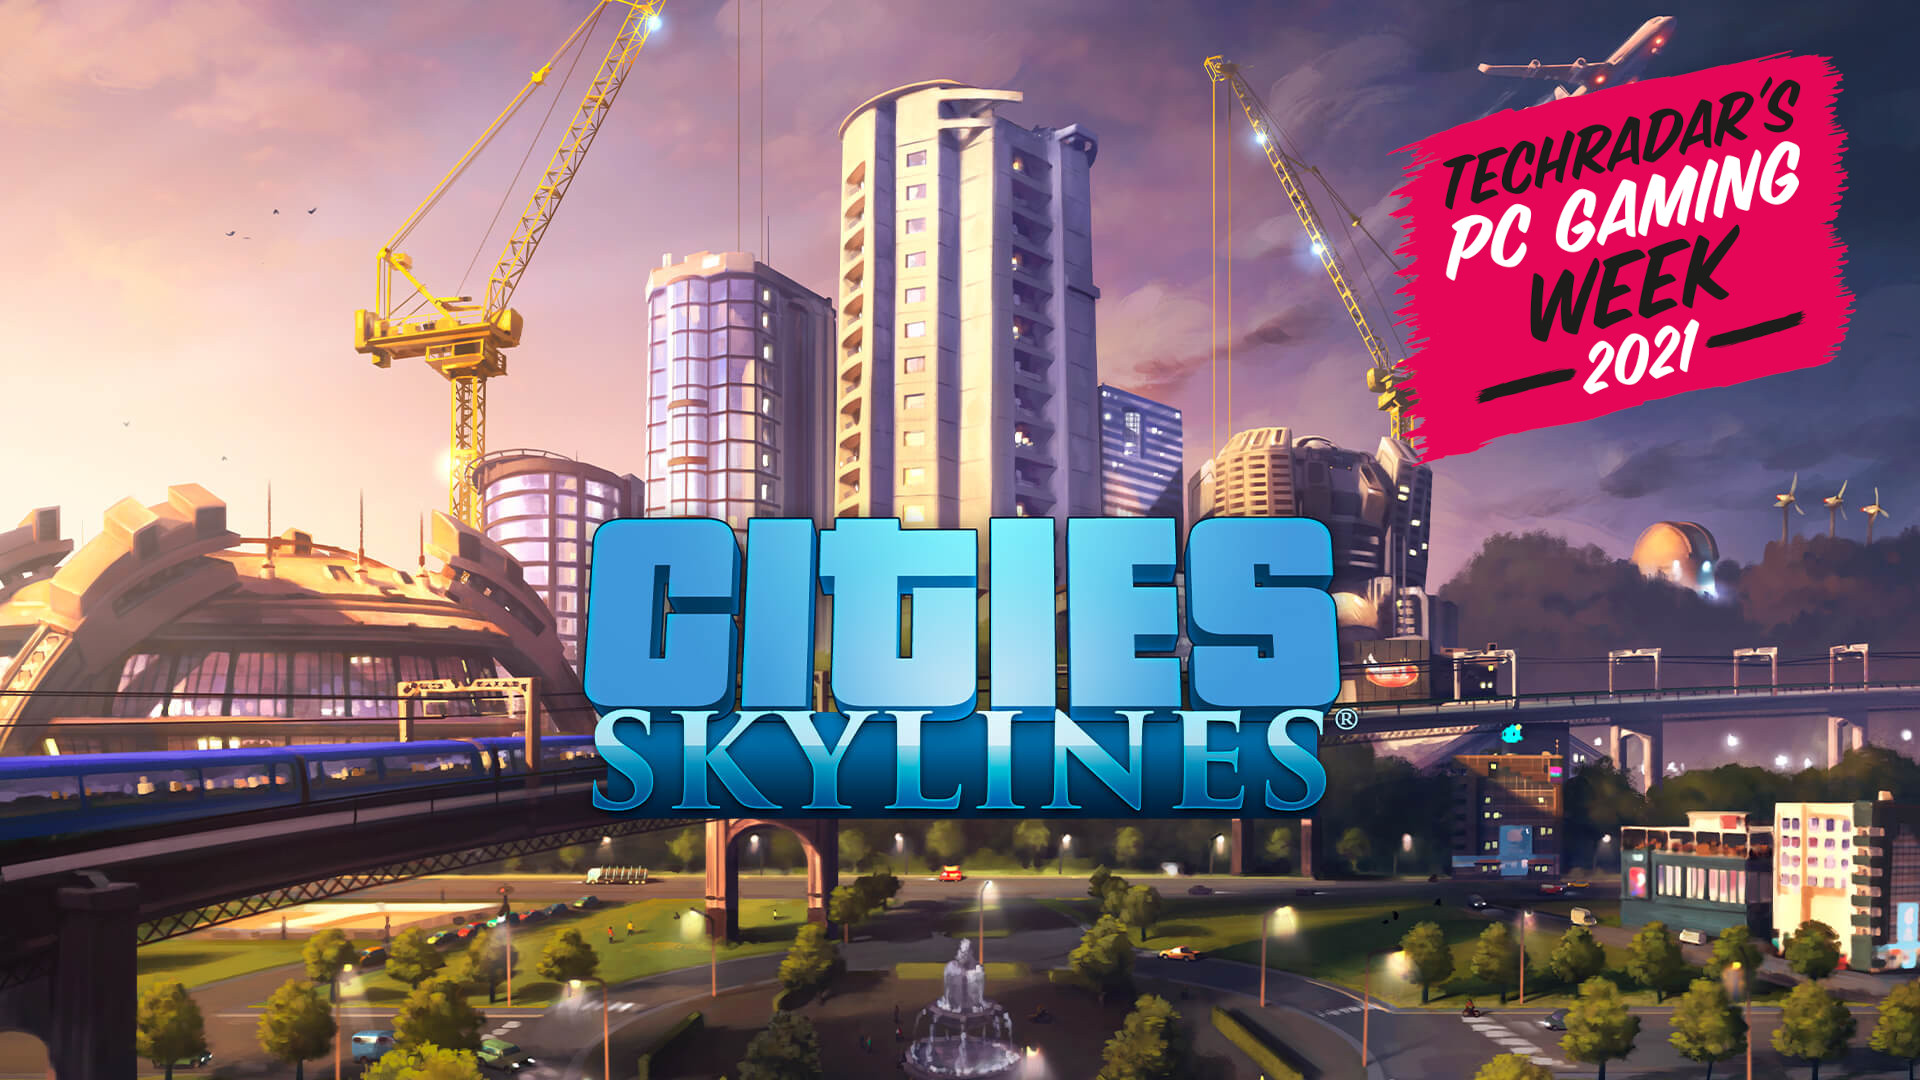 cities skylines traffic manager president edition download no steam